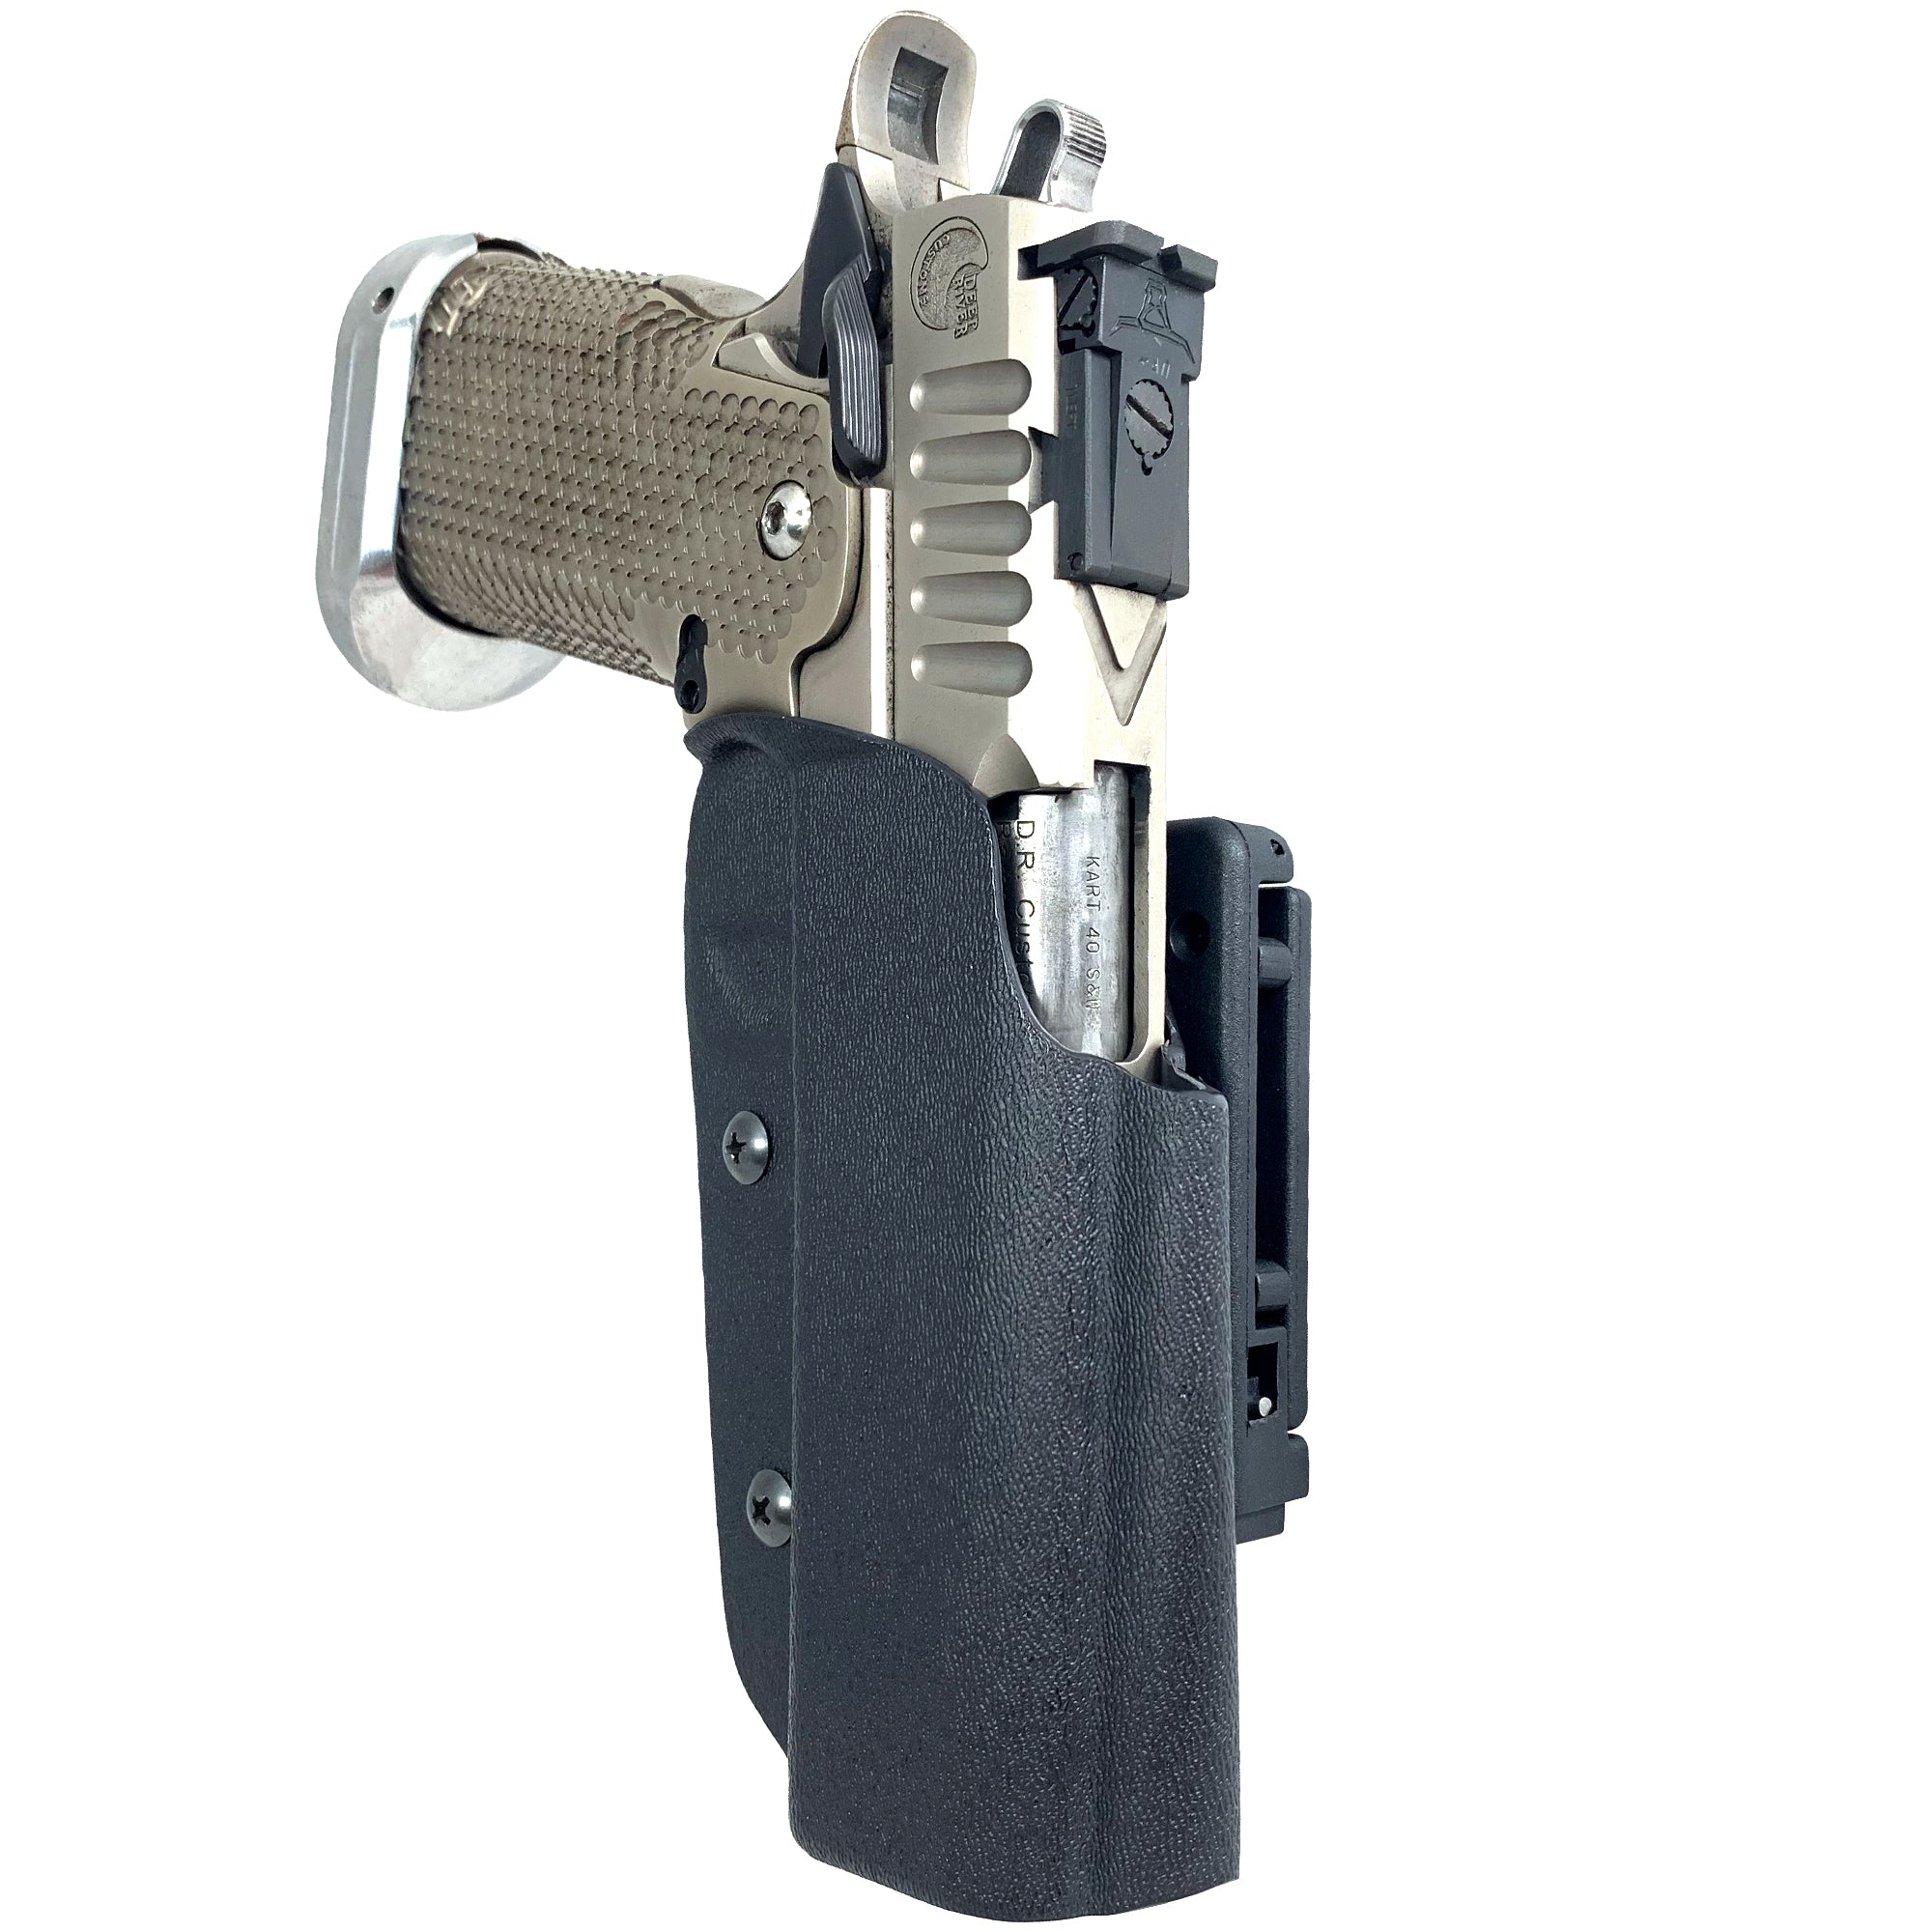 2011 Pro IDPA Competition Holster